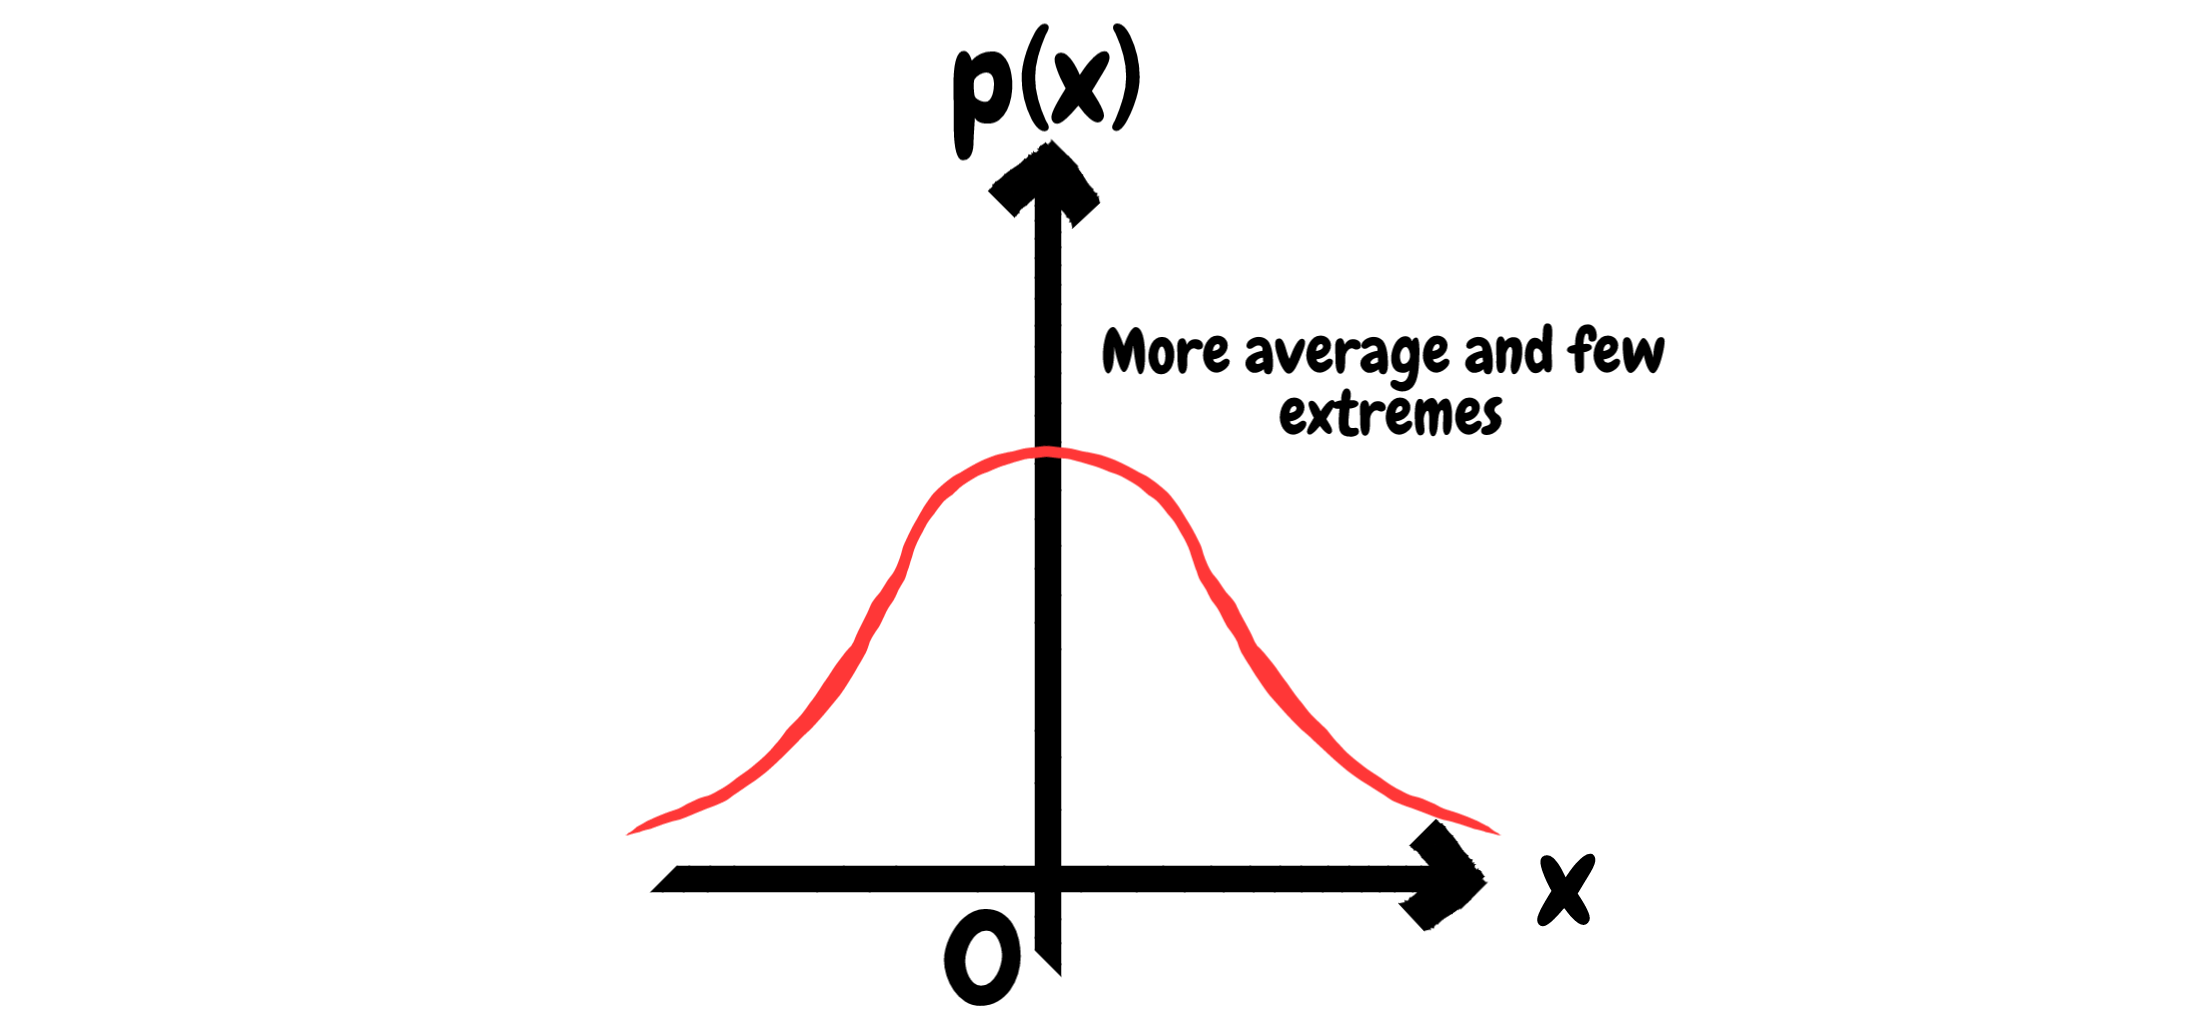 Generate random numbers - a theoretical normal distribution that has a few extreme and most cases are in the average